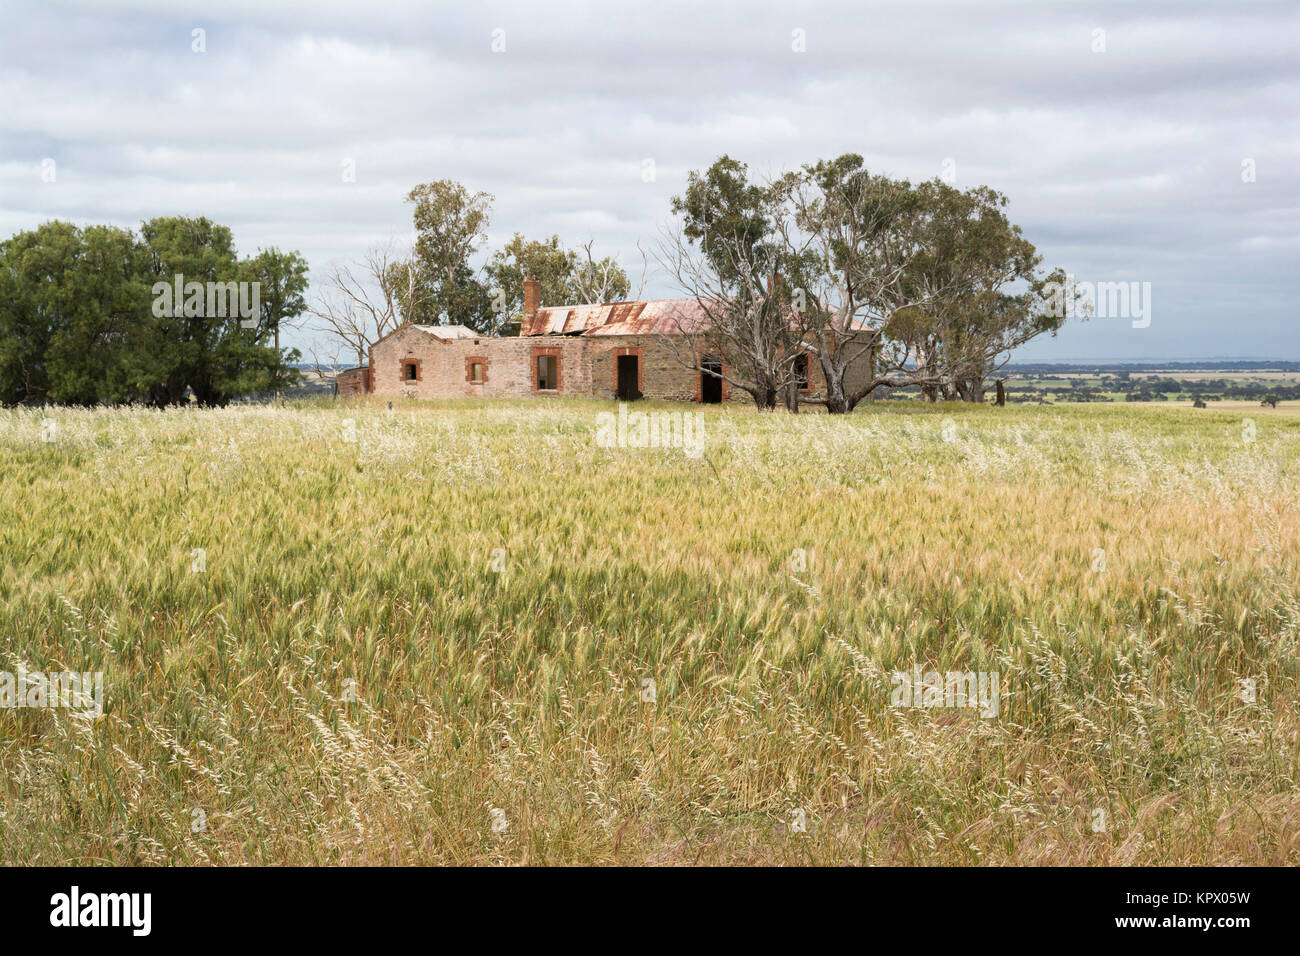 Old disused and abandoned farm house in disrepair surrounded by a crop of growing wheat. Situated in Sandergrove, South Australia. Stock Photo